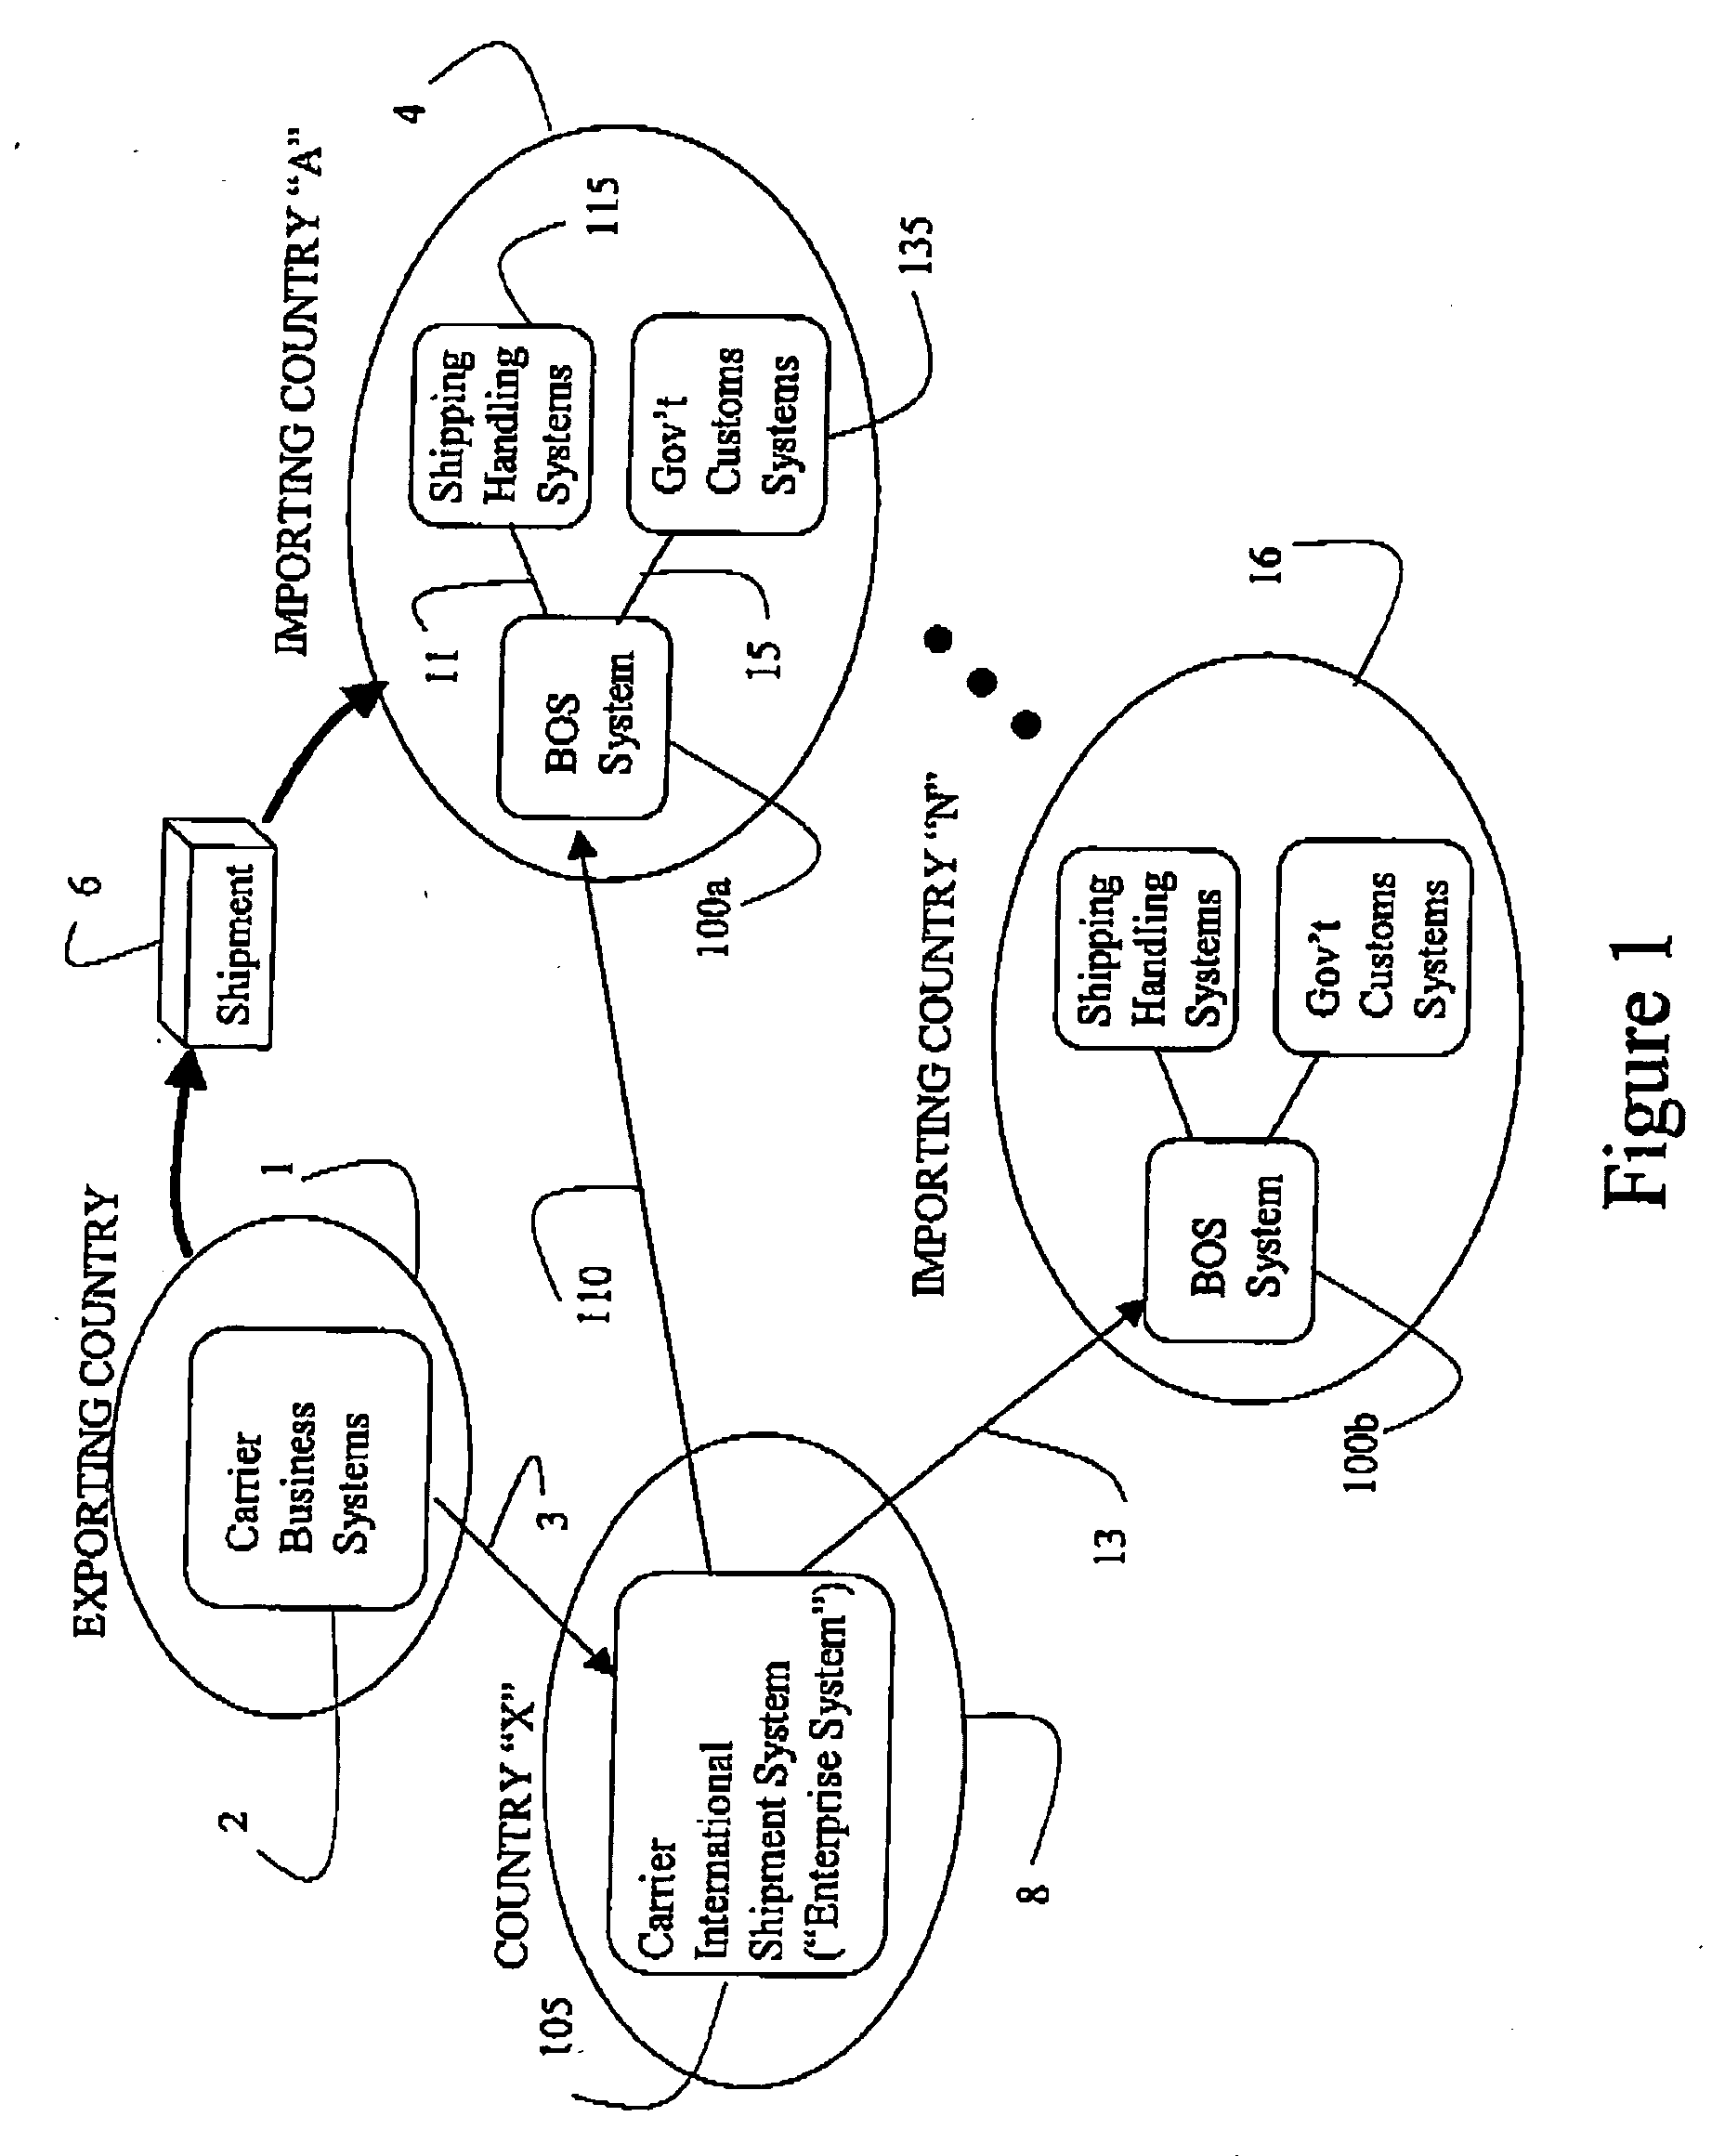 Systems and methods for international shipping and brokage operations support processing